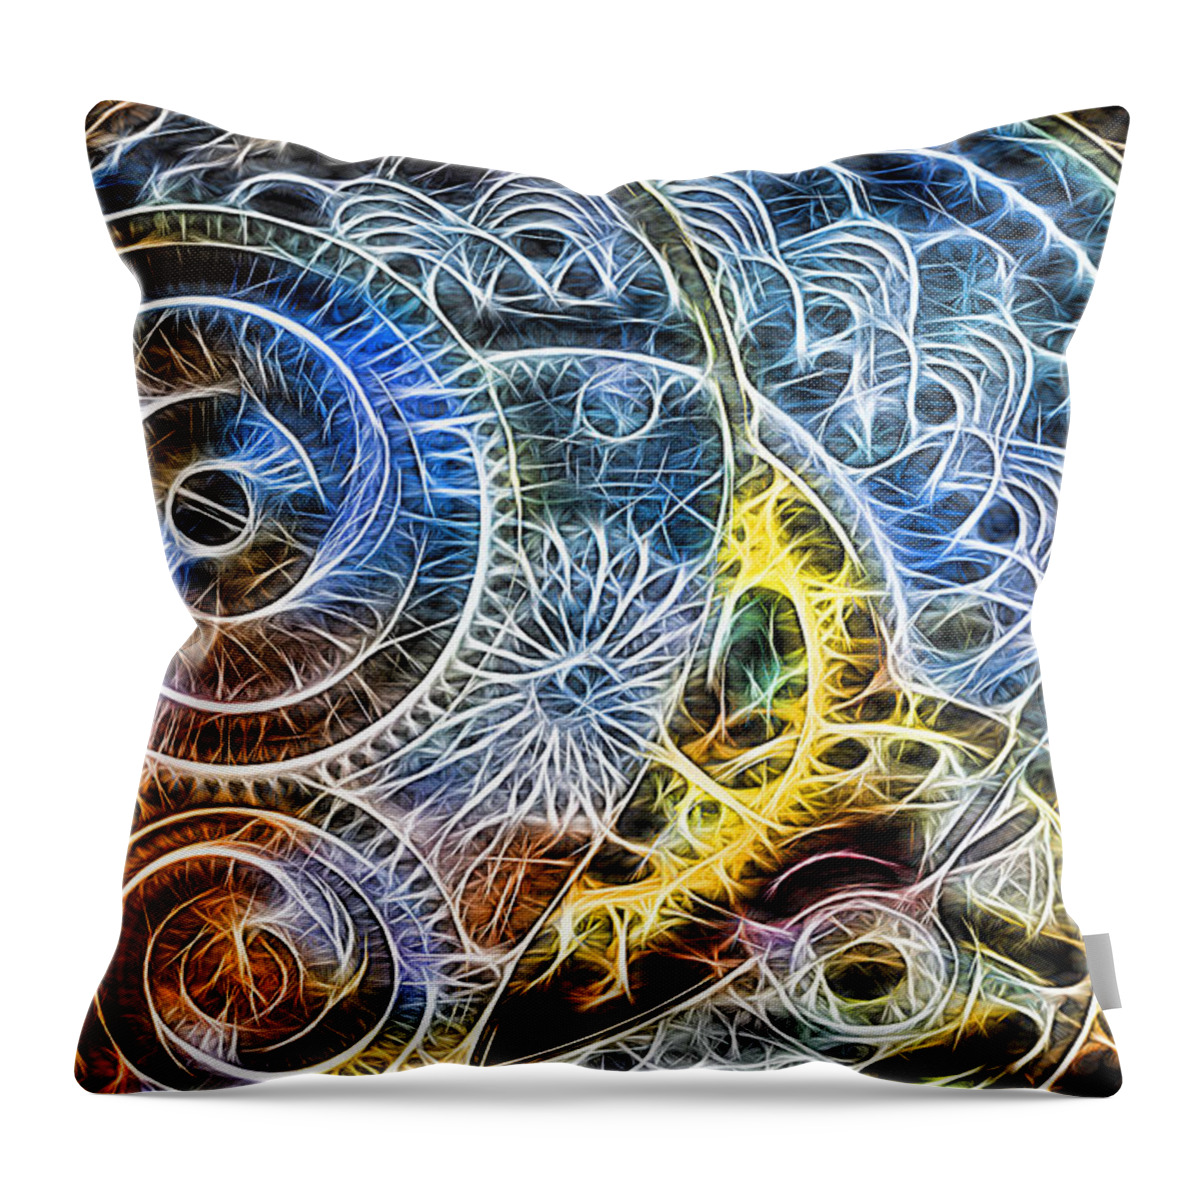 Abstract Throw Pillow featuring the digital art Cosmo by Ches Black